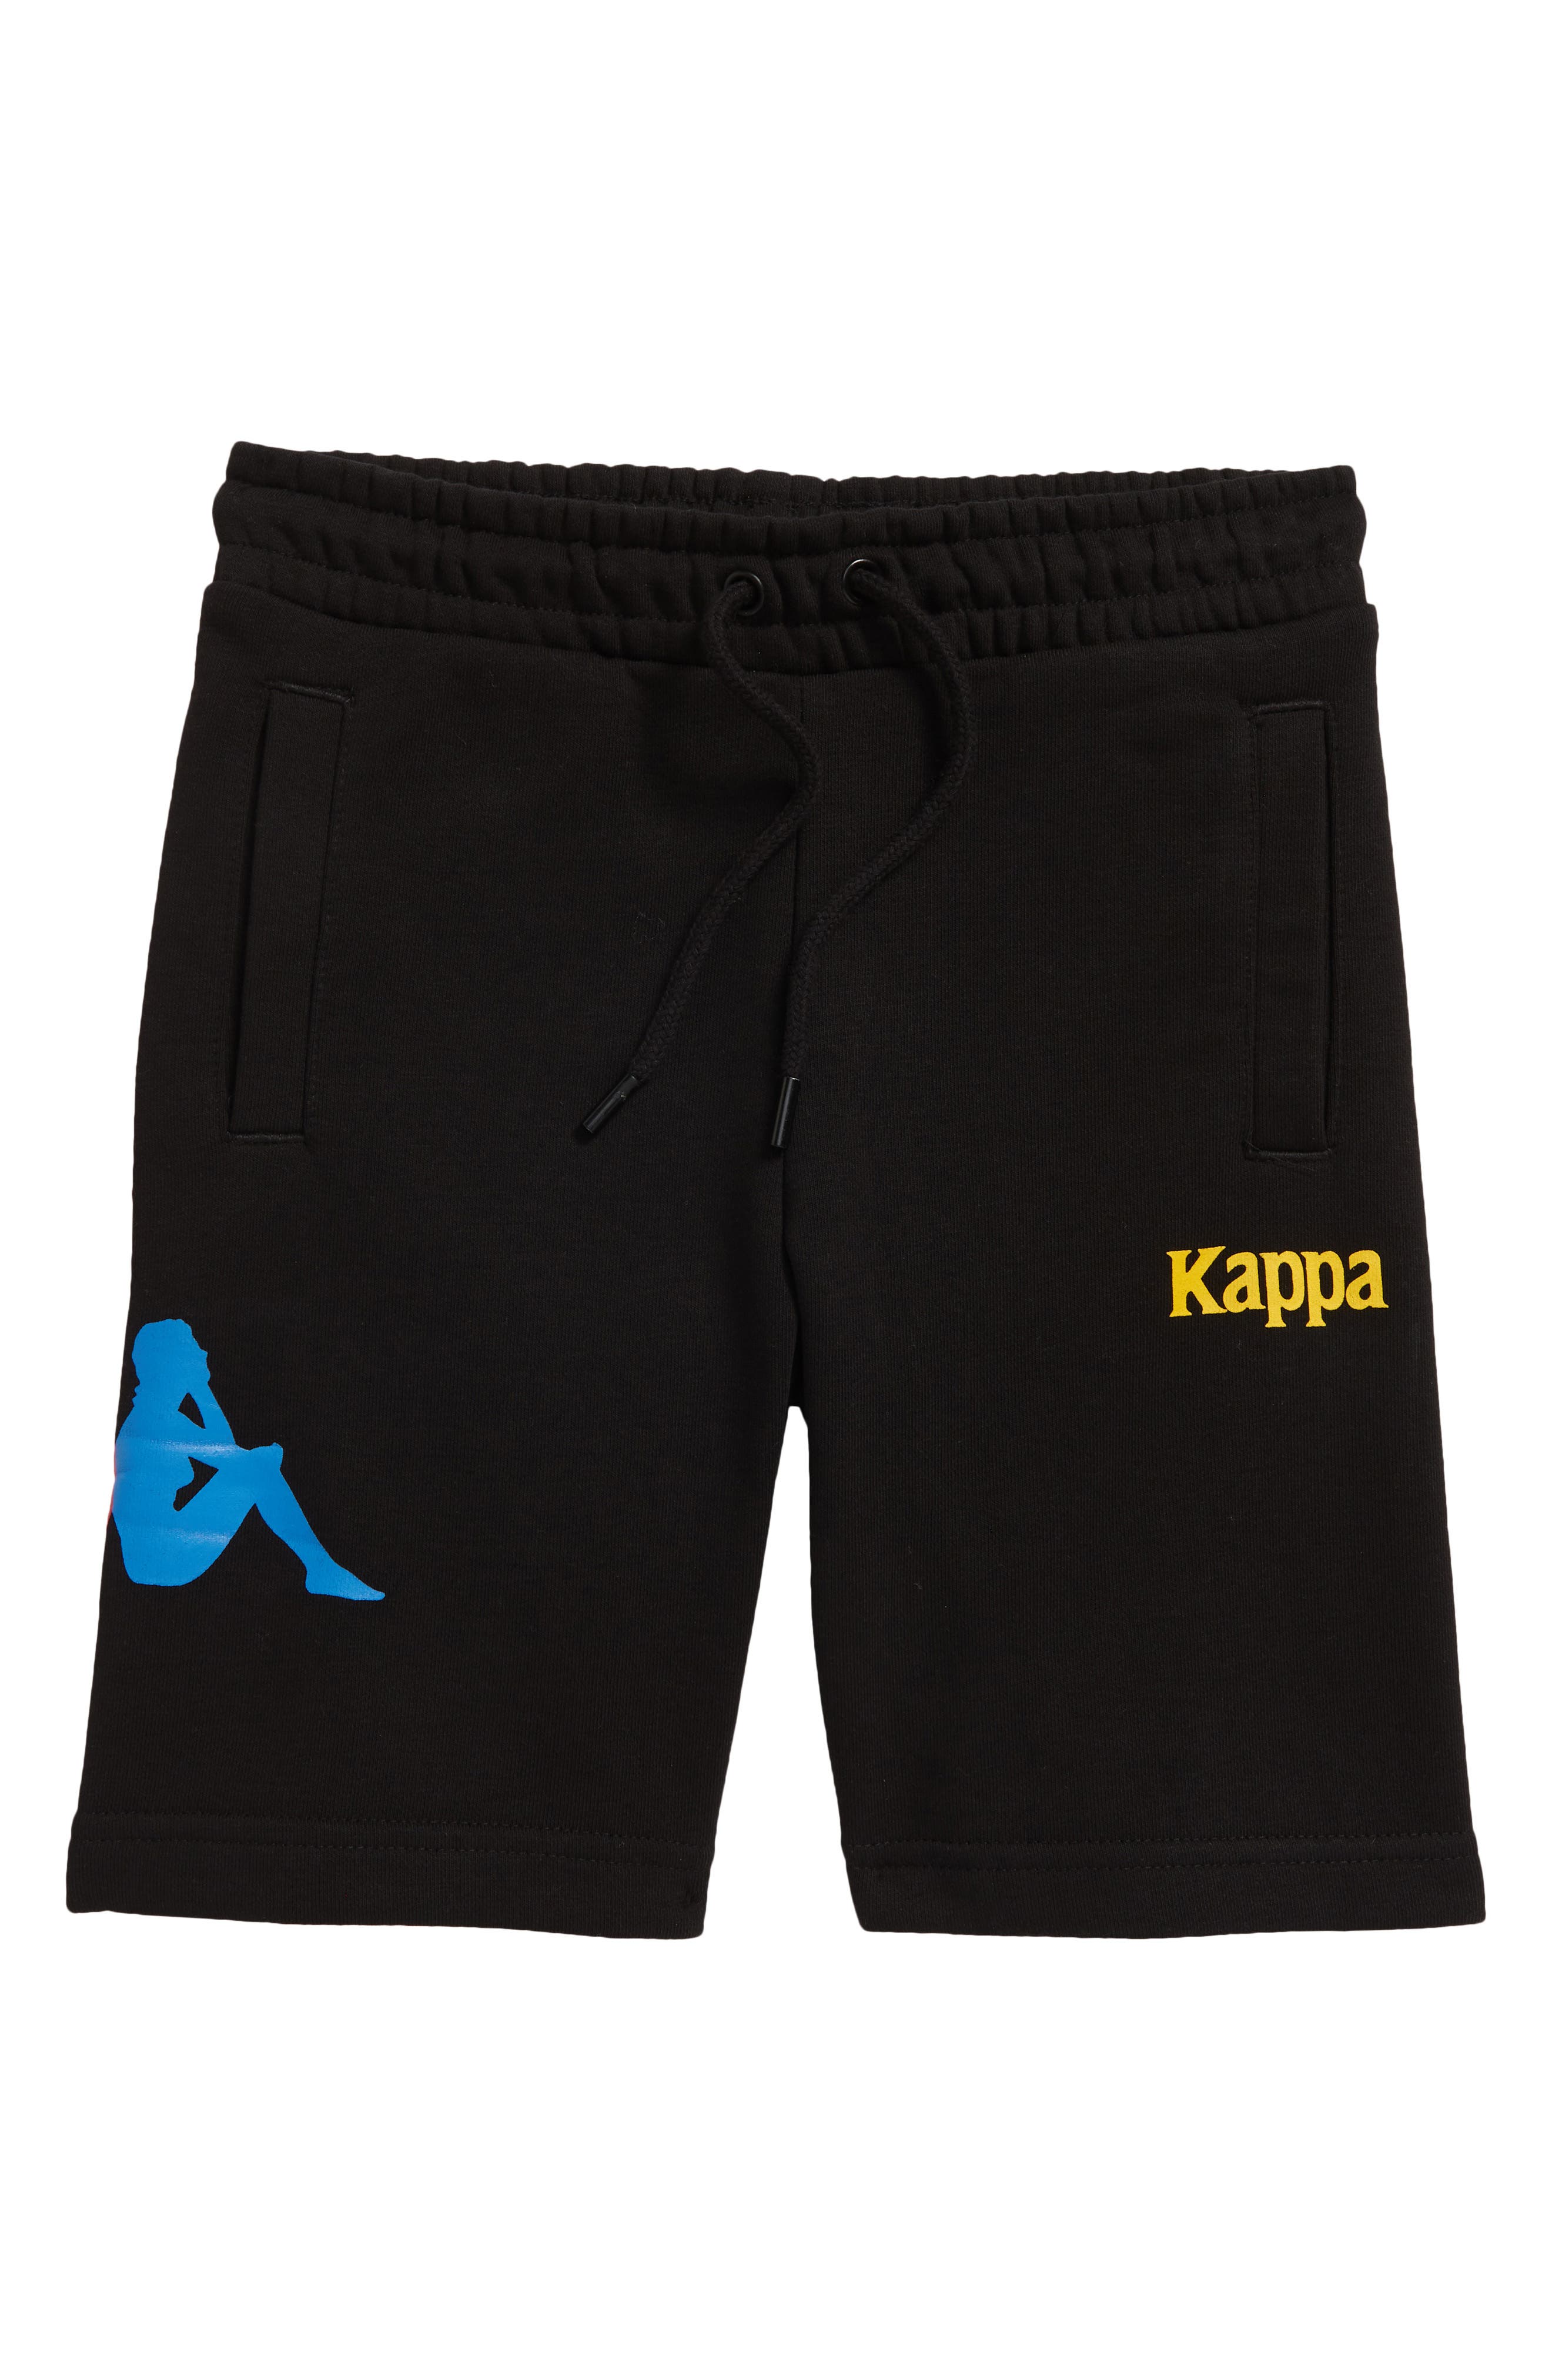 Kappa Kids' Authentic Sangone Shorts in Black Fuchsia Blue at Nordstrom, Size 12Y Us